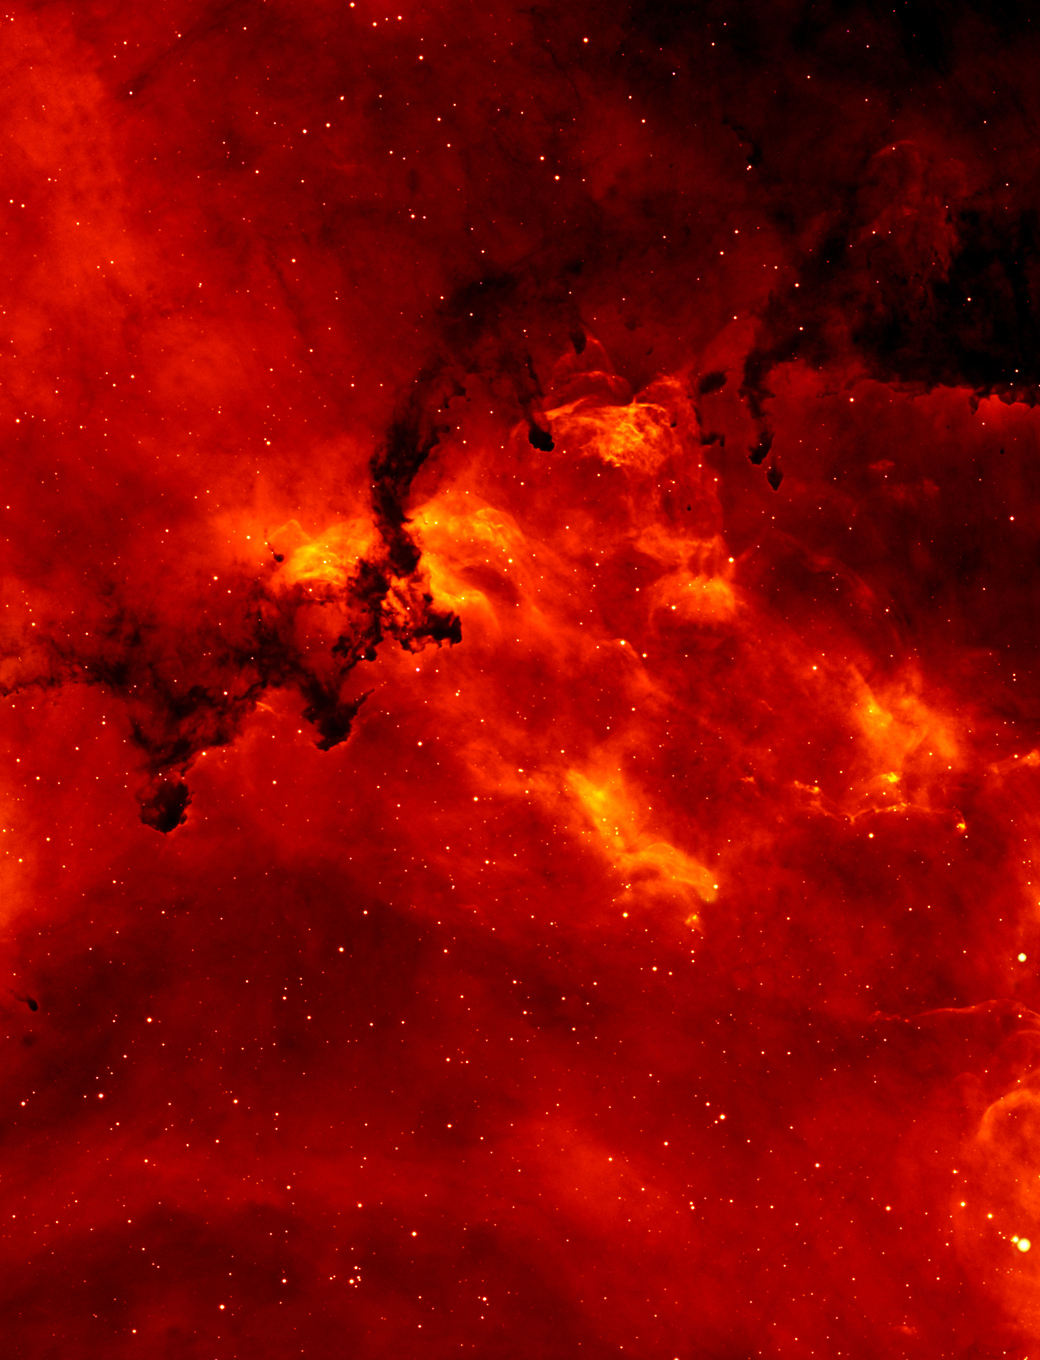 Iphone4s4 - Red Space 21 9 - HD Wallpaper 